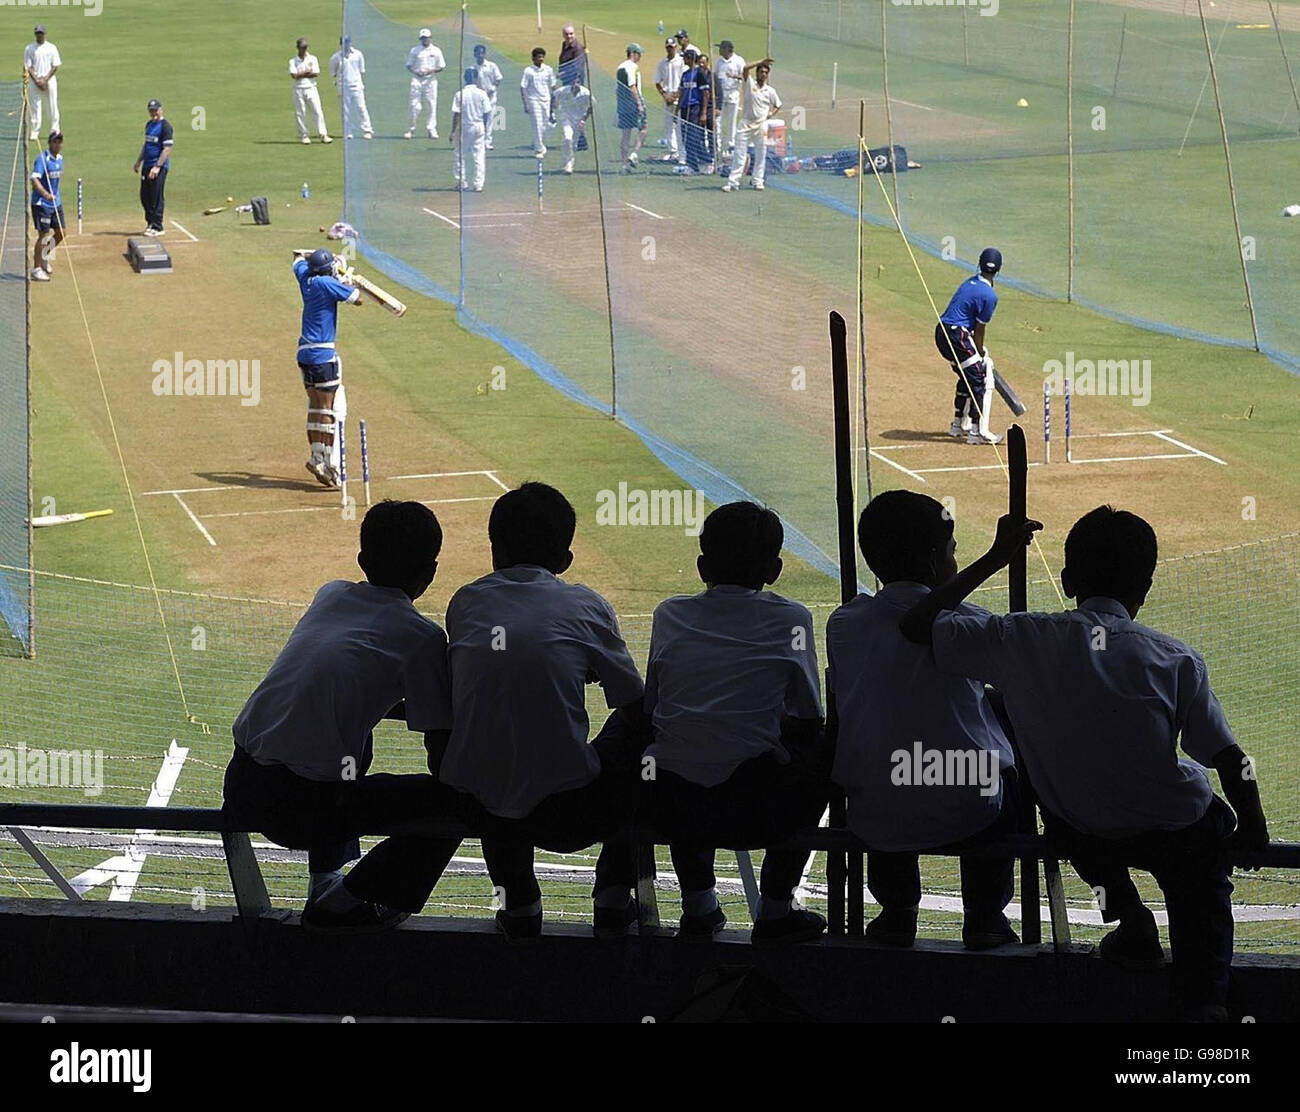 Cricket - India Practice Session - Wankhede Stadium, Bombay. Schoolboys watch India in action during a net practice session at the Wankhede Stadium, Bombay, India. Stock Photo